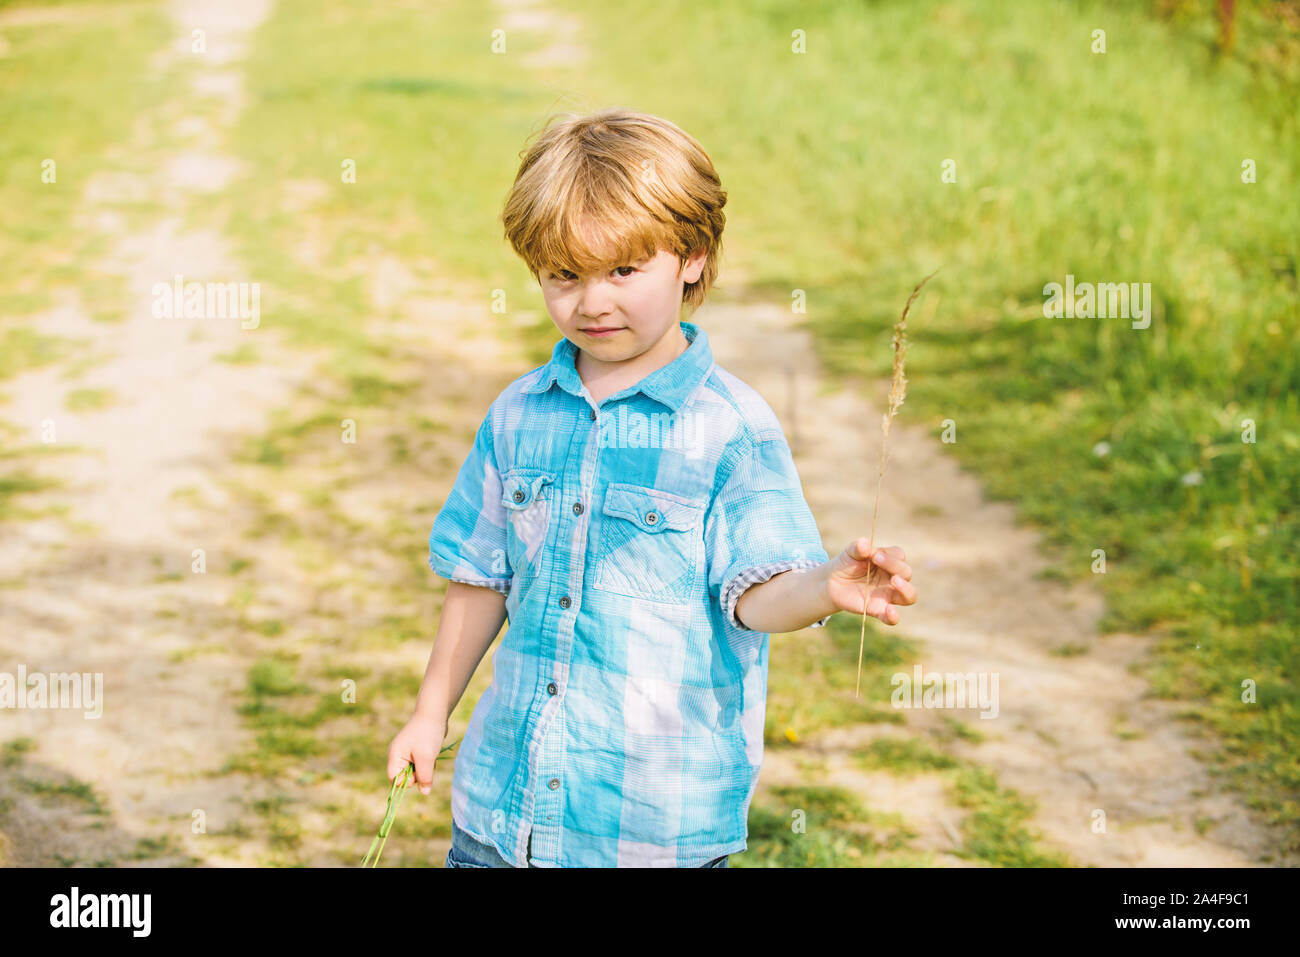 little boy hold spikelet grass in hand. new life. human and nature. small kid walking outdoor. earth day. Eco future. summer activity. farming and agriculture. happy child farmer. spring harvest. Stock Photo